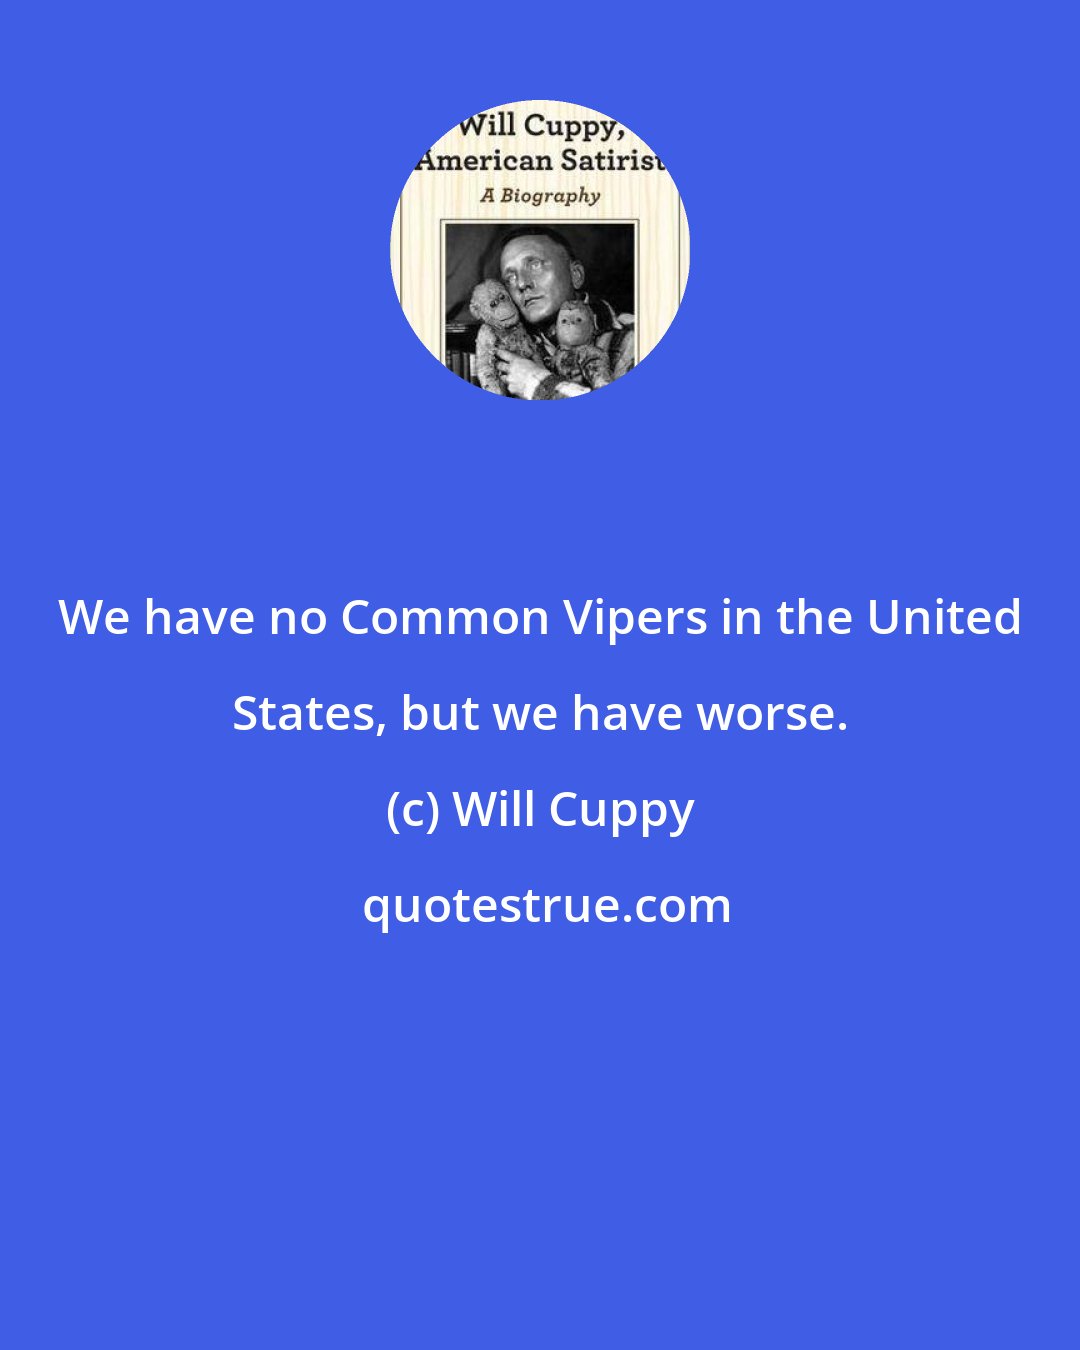 Will Cuppy: We have no Common Vipers in the United States, but we have worse.